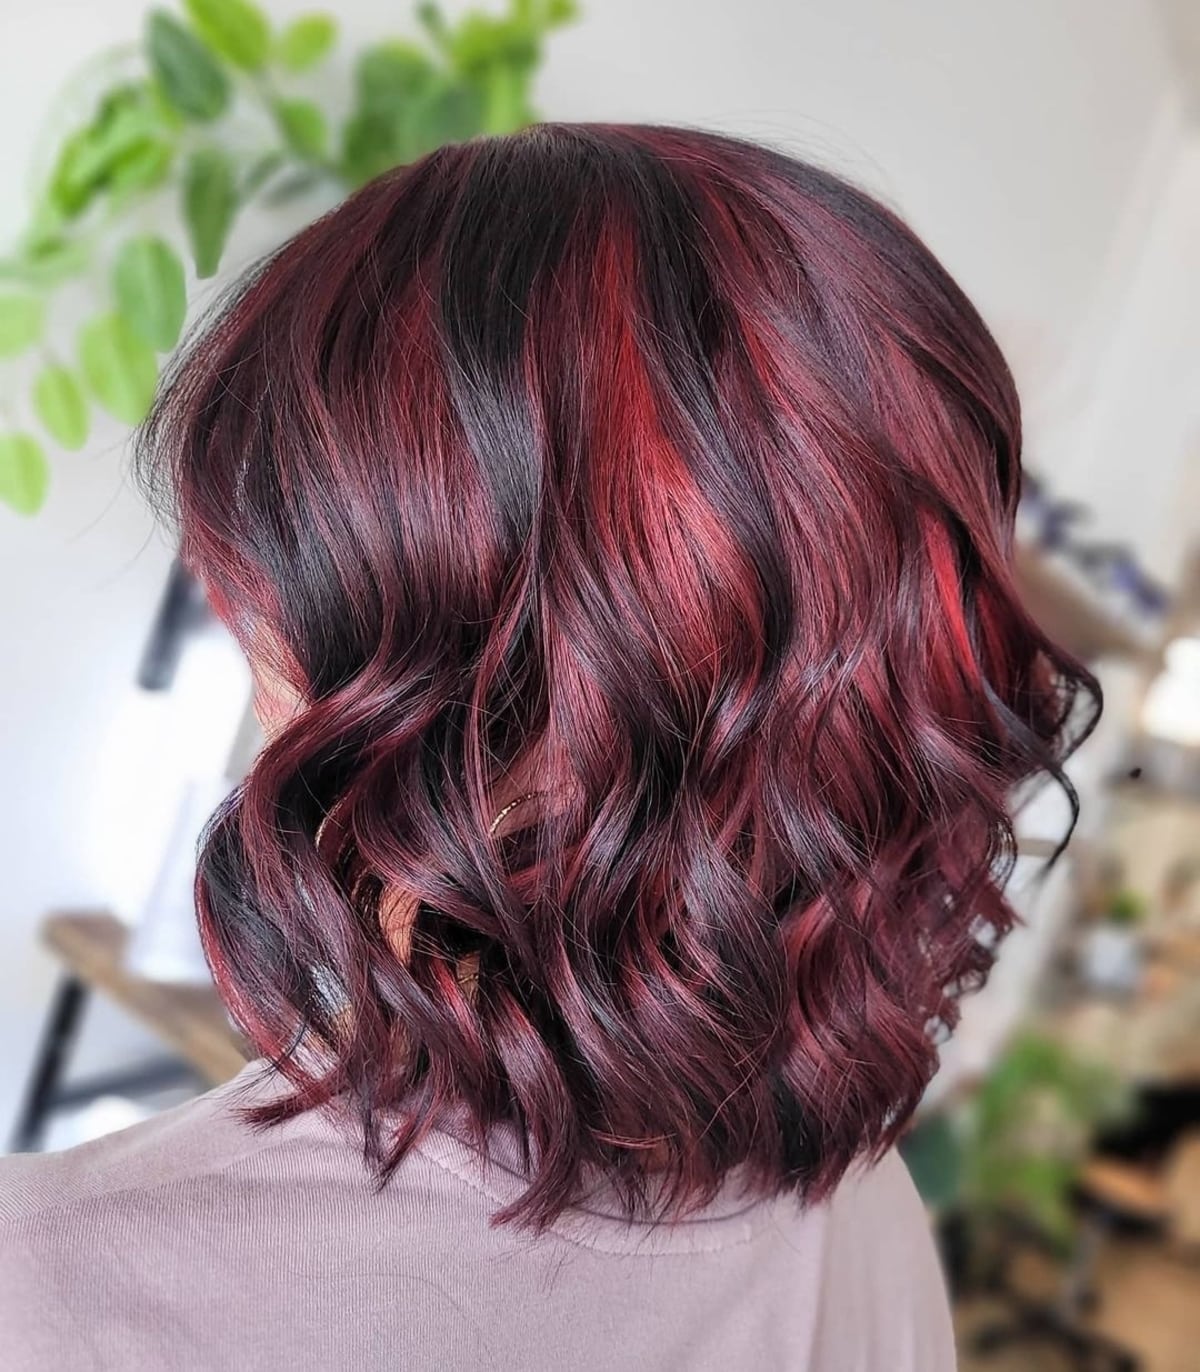 Black hair with red highlights